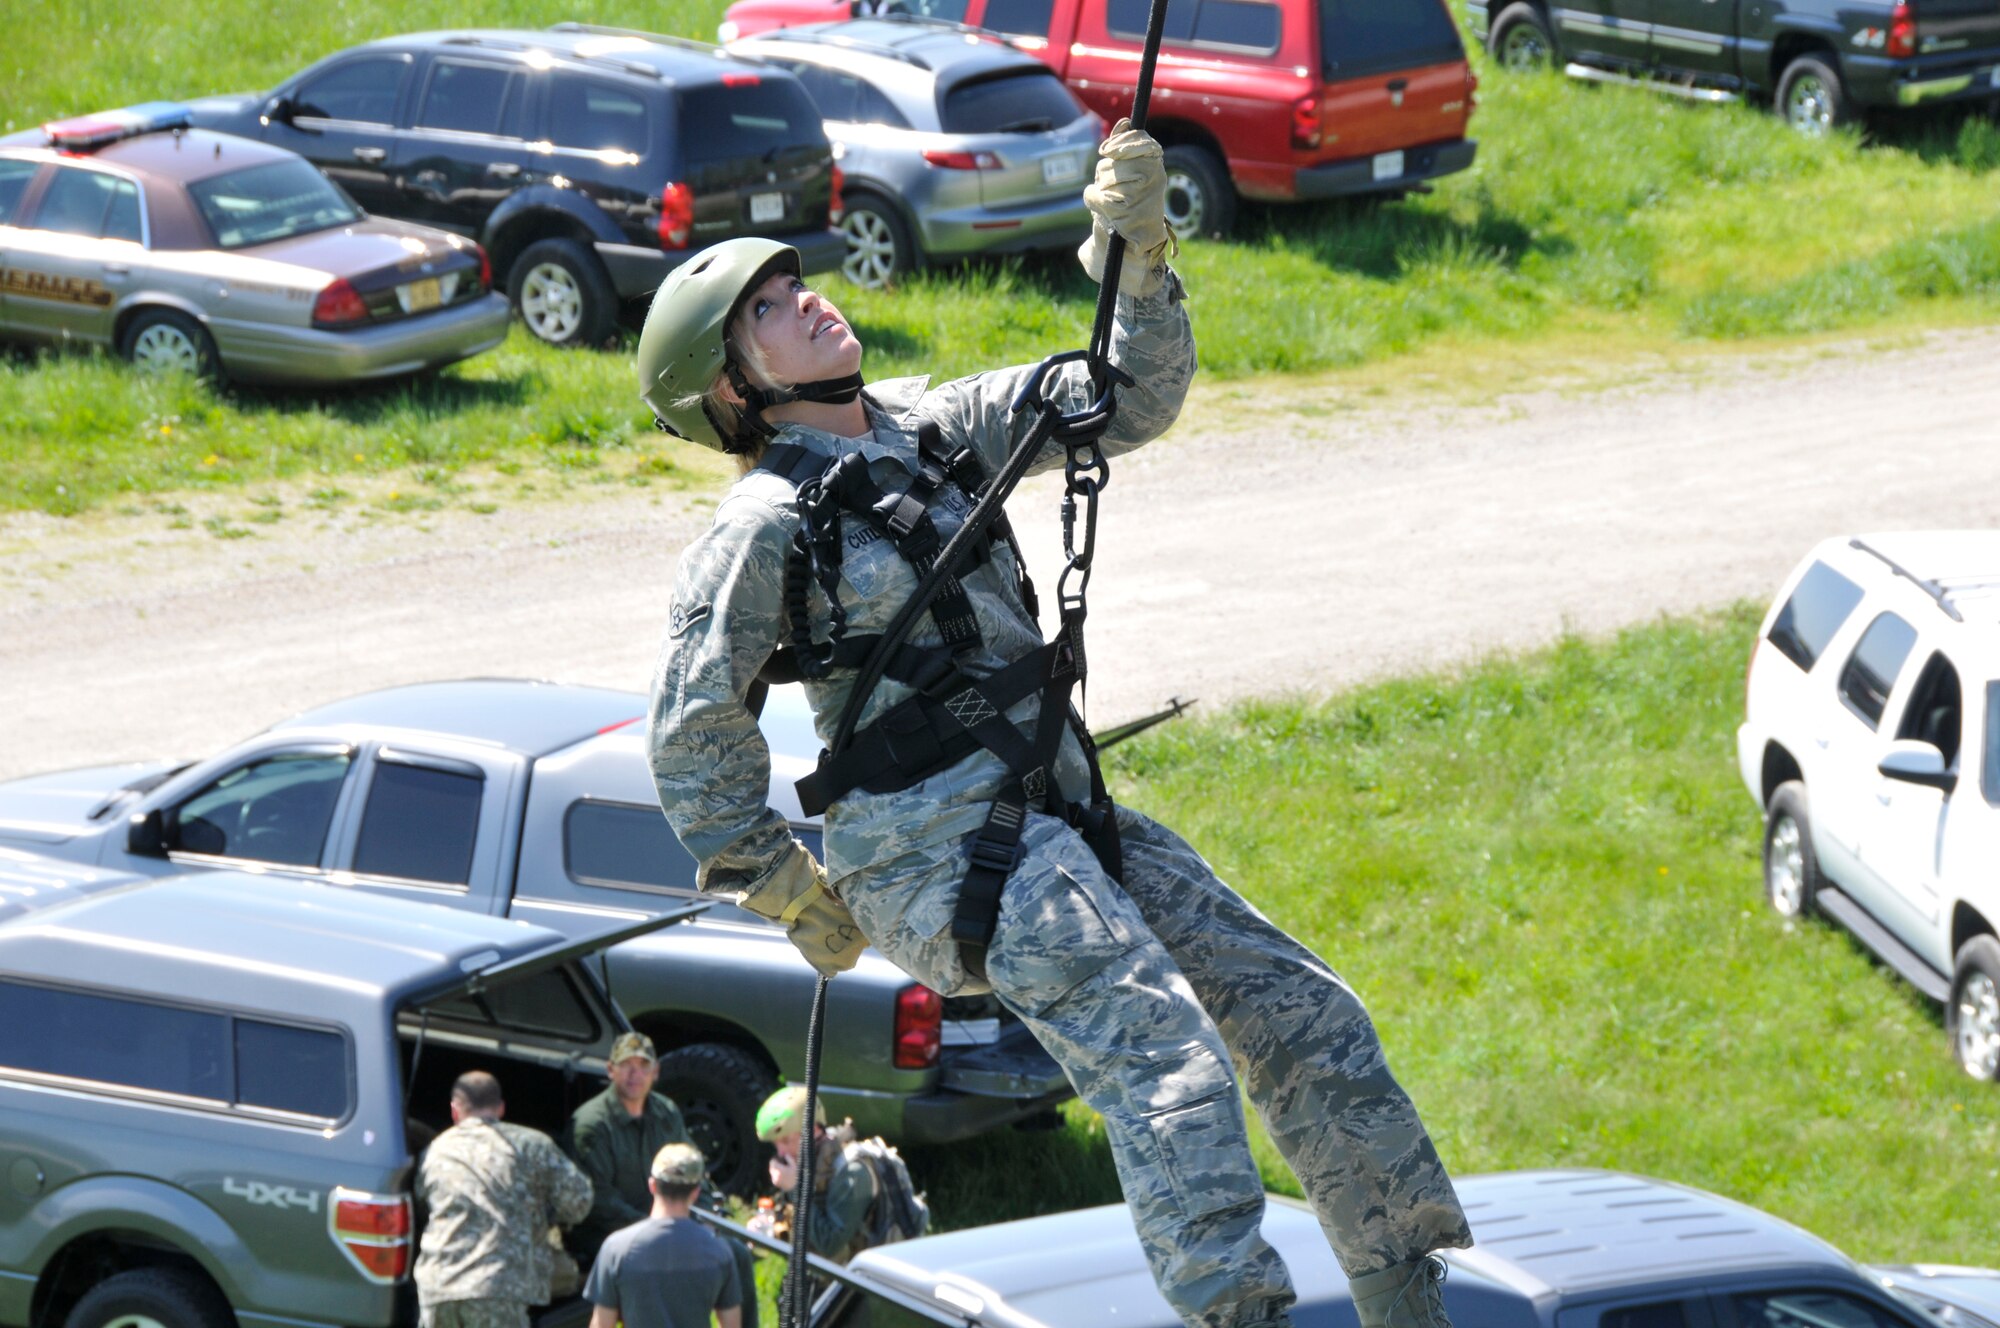 U.S. Air Force Airman 1st Class Candace M. Cutler, 181st Intelligence Wing, Security Forces Squadron, repels off a 40 foot tower at Camp Atterbury, Edinburgh, Ind., on May 14, 2013. Security Forces went to participate in multi-agency law enforcement training event which promotes better communications between agencies and allows for additional skill sets directly related to the Air National Guard's missions of Homeland Security and Domestic Operations.  (U.S. Air National Guard photo by Senior Master Sgt. John S. Chapman/Released)